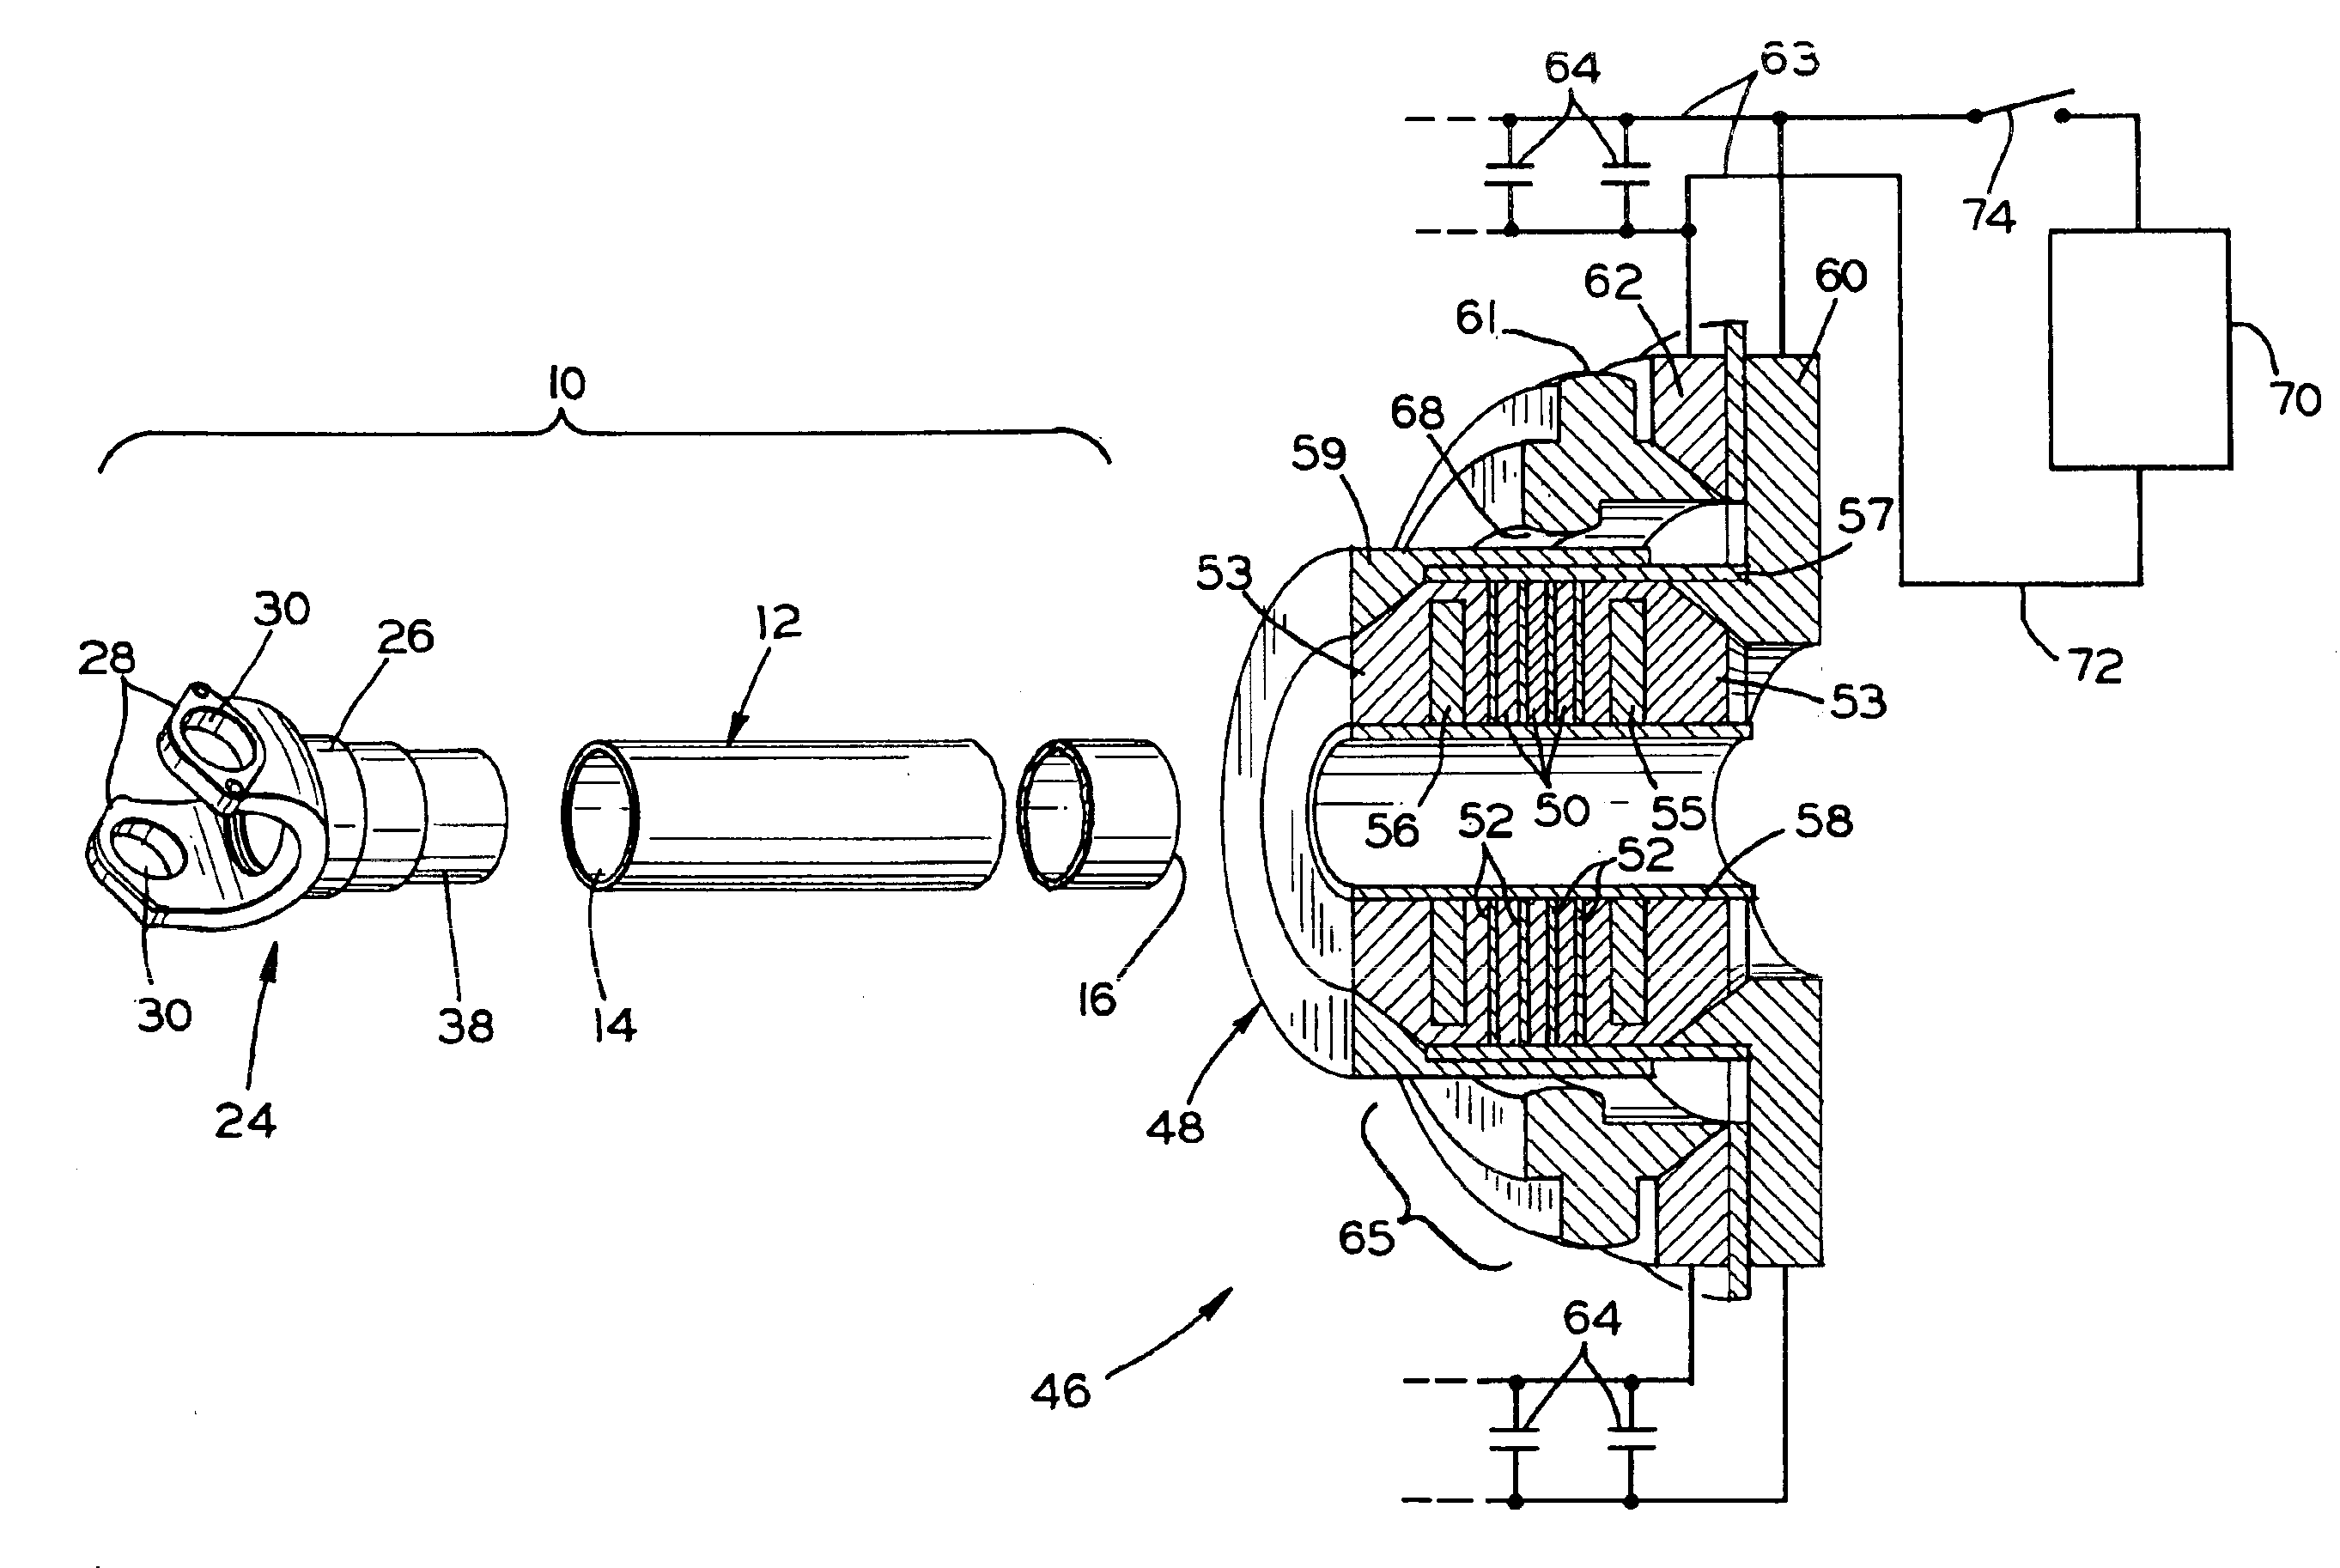 Method of magnetic pulse welding an end fitting to a driveshaft tube of a vehicular driveshaft